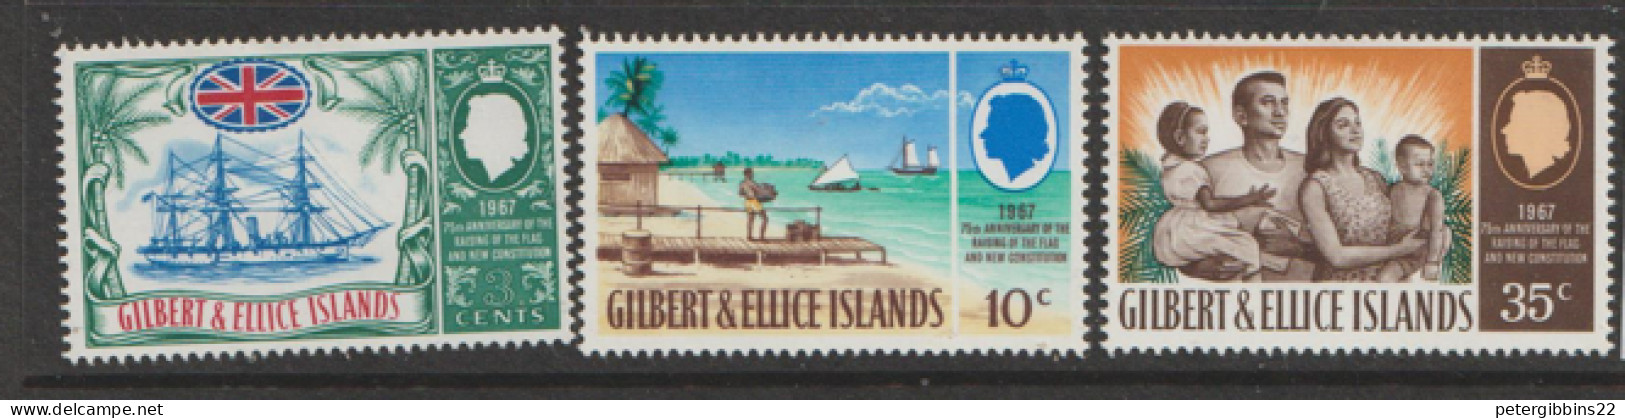 Gilbert And Ellice Islands 1965  SG 132-4 Anniversary Protectorate  Lightly Mounted Mint - Îles Gilbert Et Ellice (...-1979)